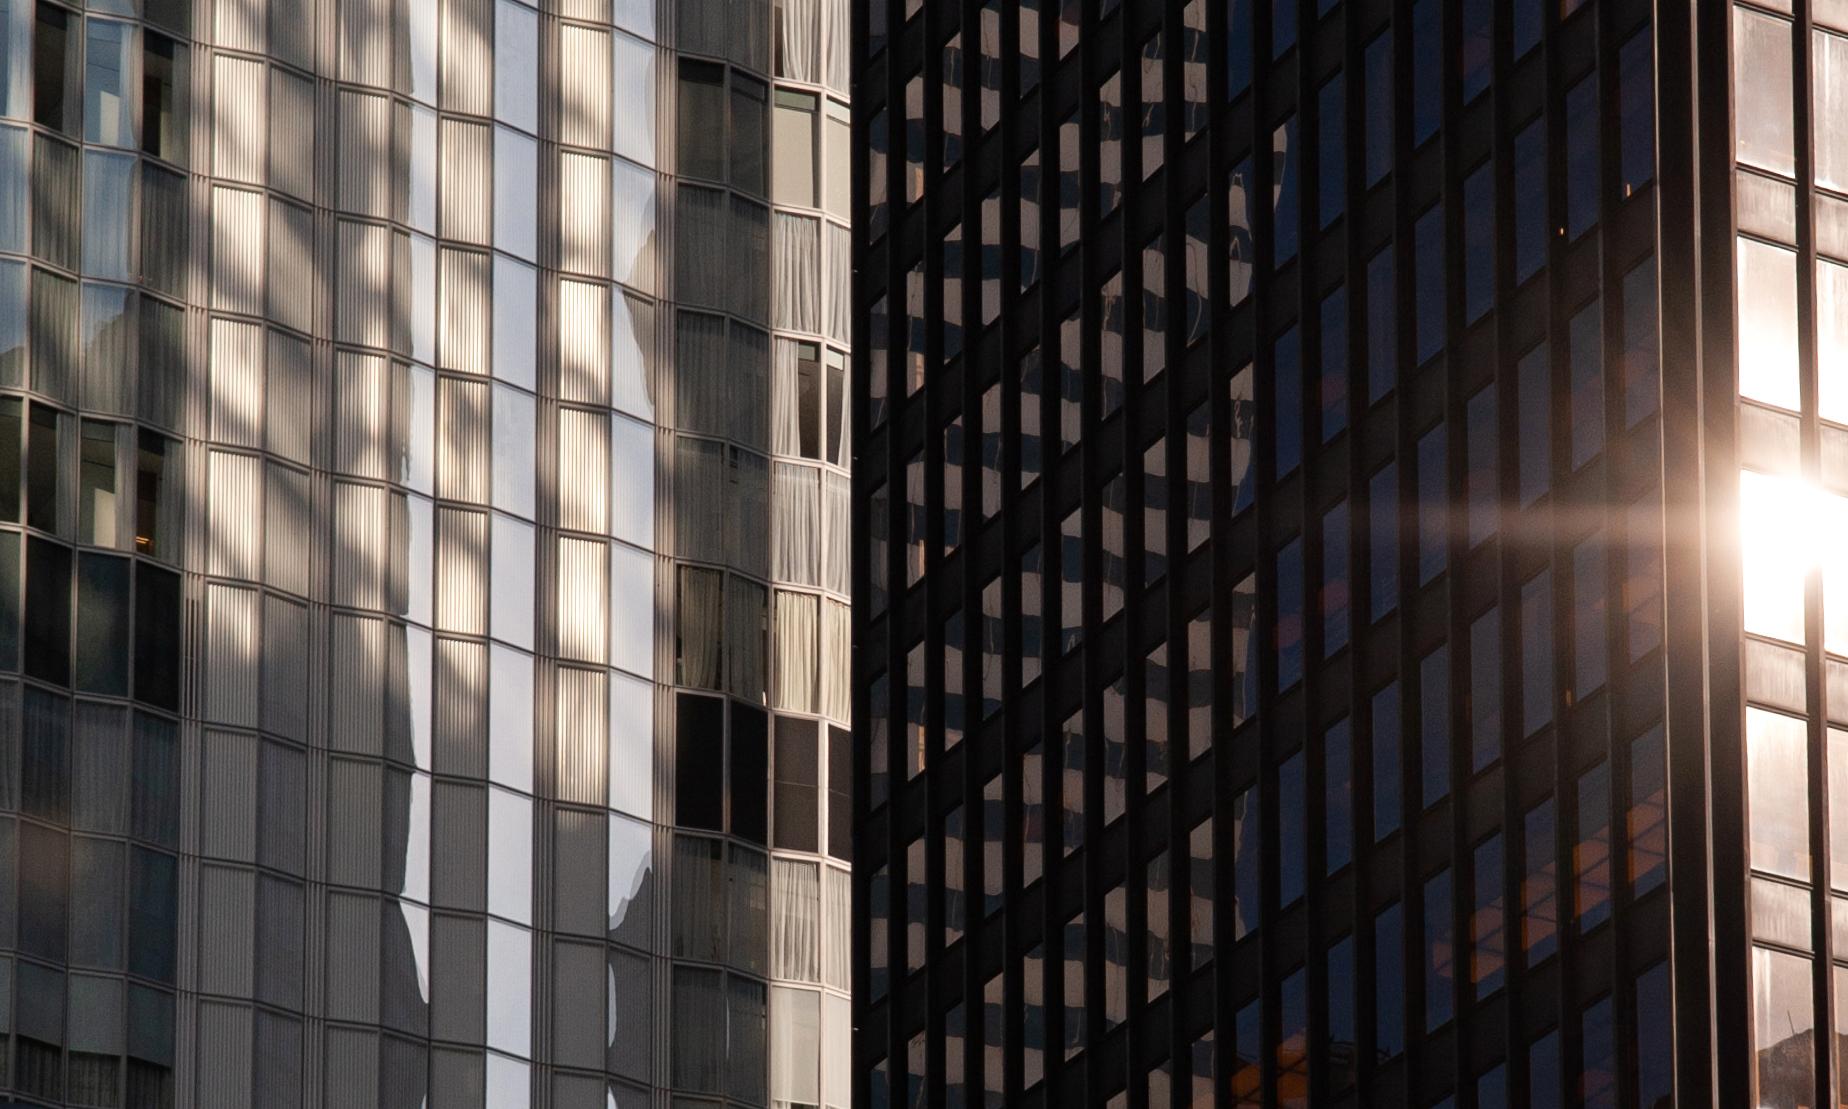 The sun reflects off the Seagrams Building (foreground) in Midtown Manhattan.